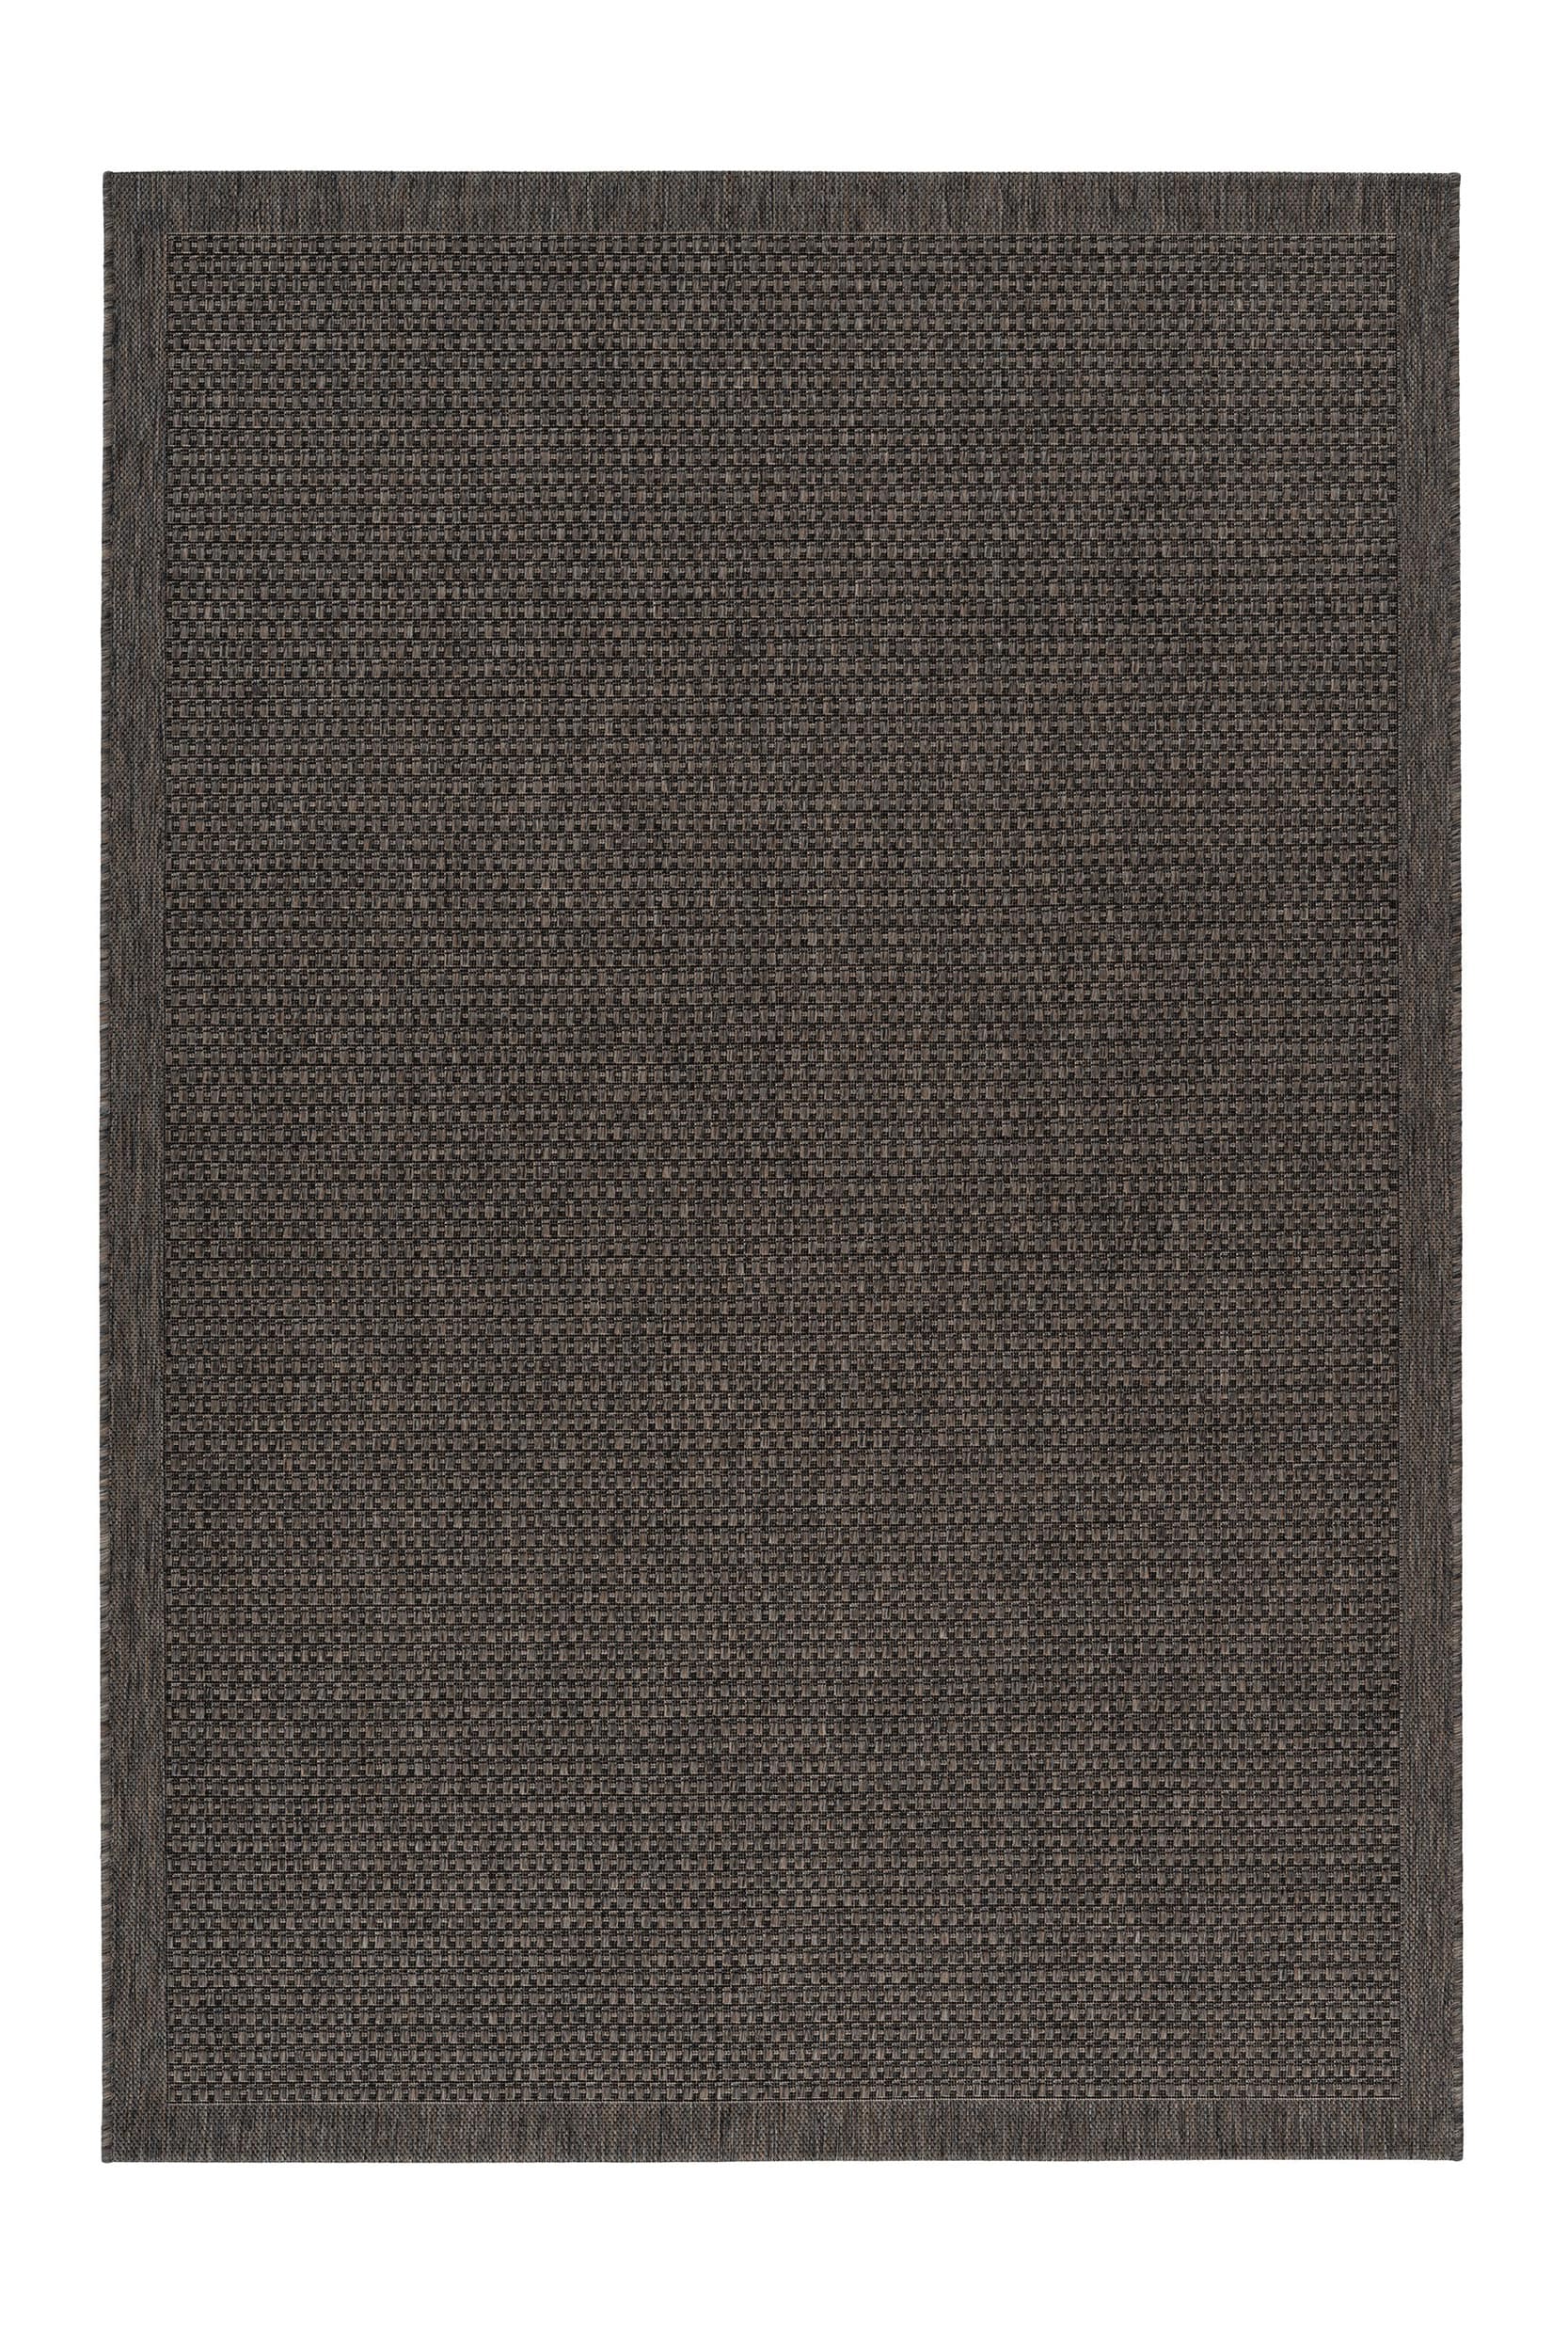 Outdoor Teppich "Sunside" taupe, 160x230cm